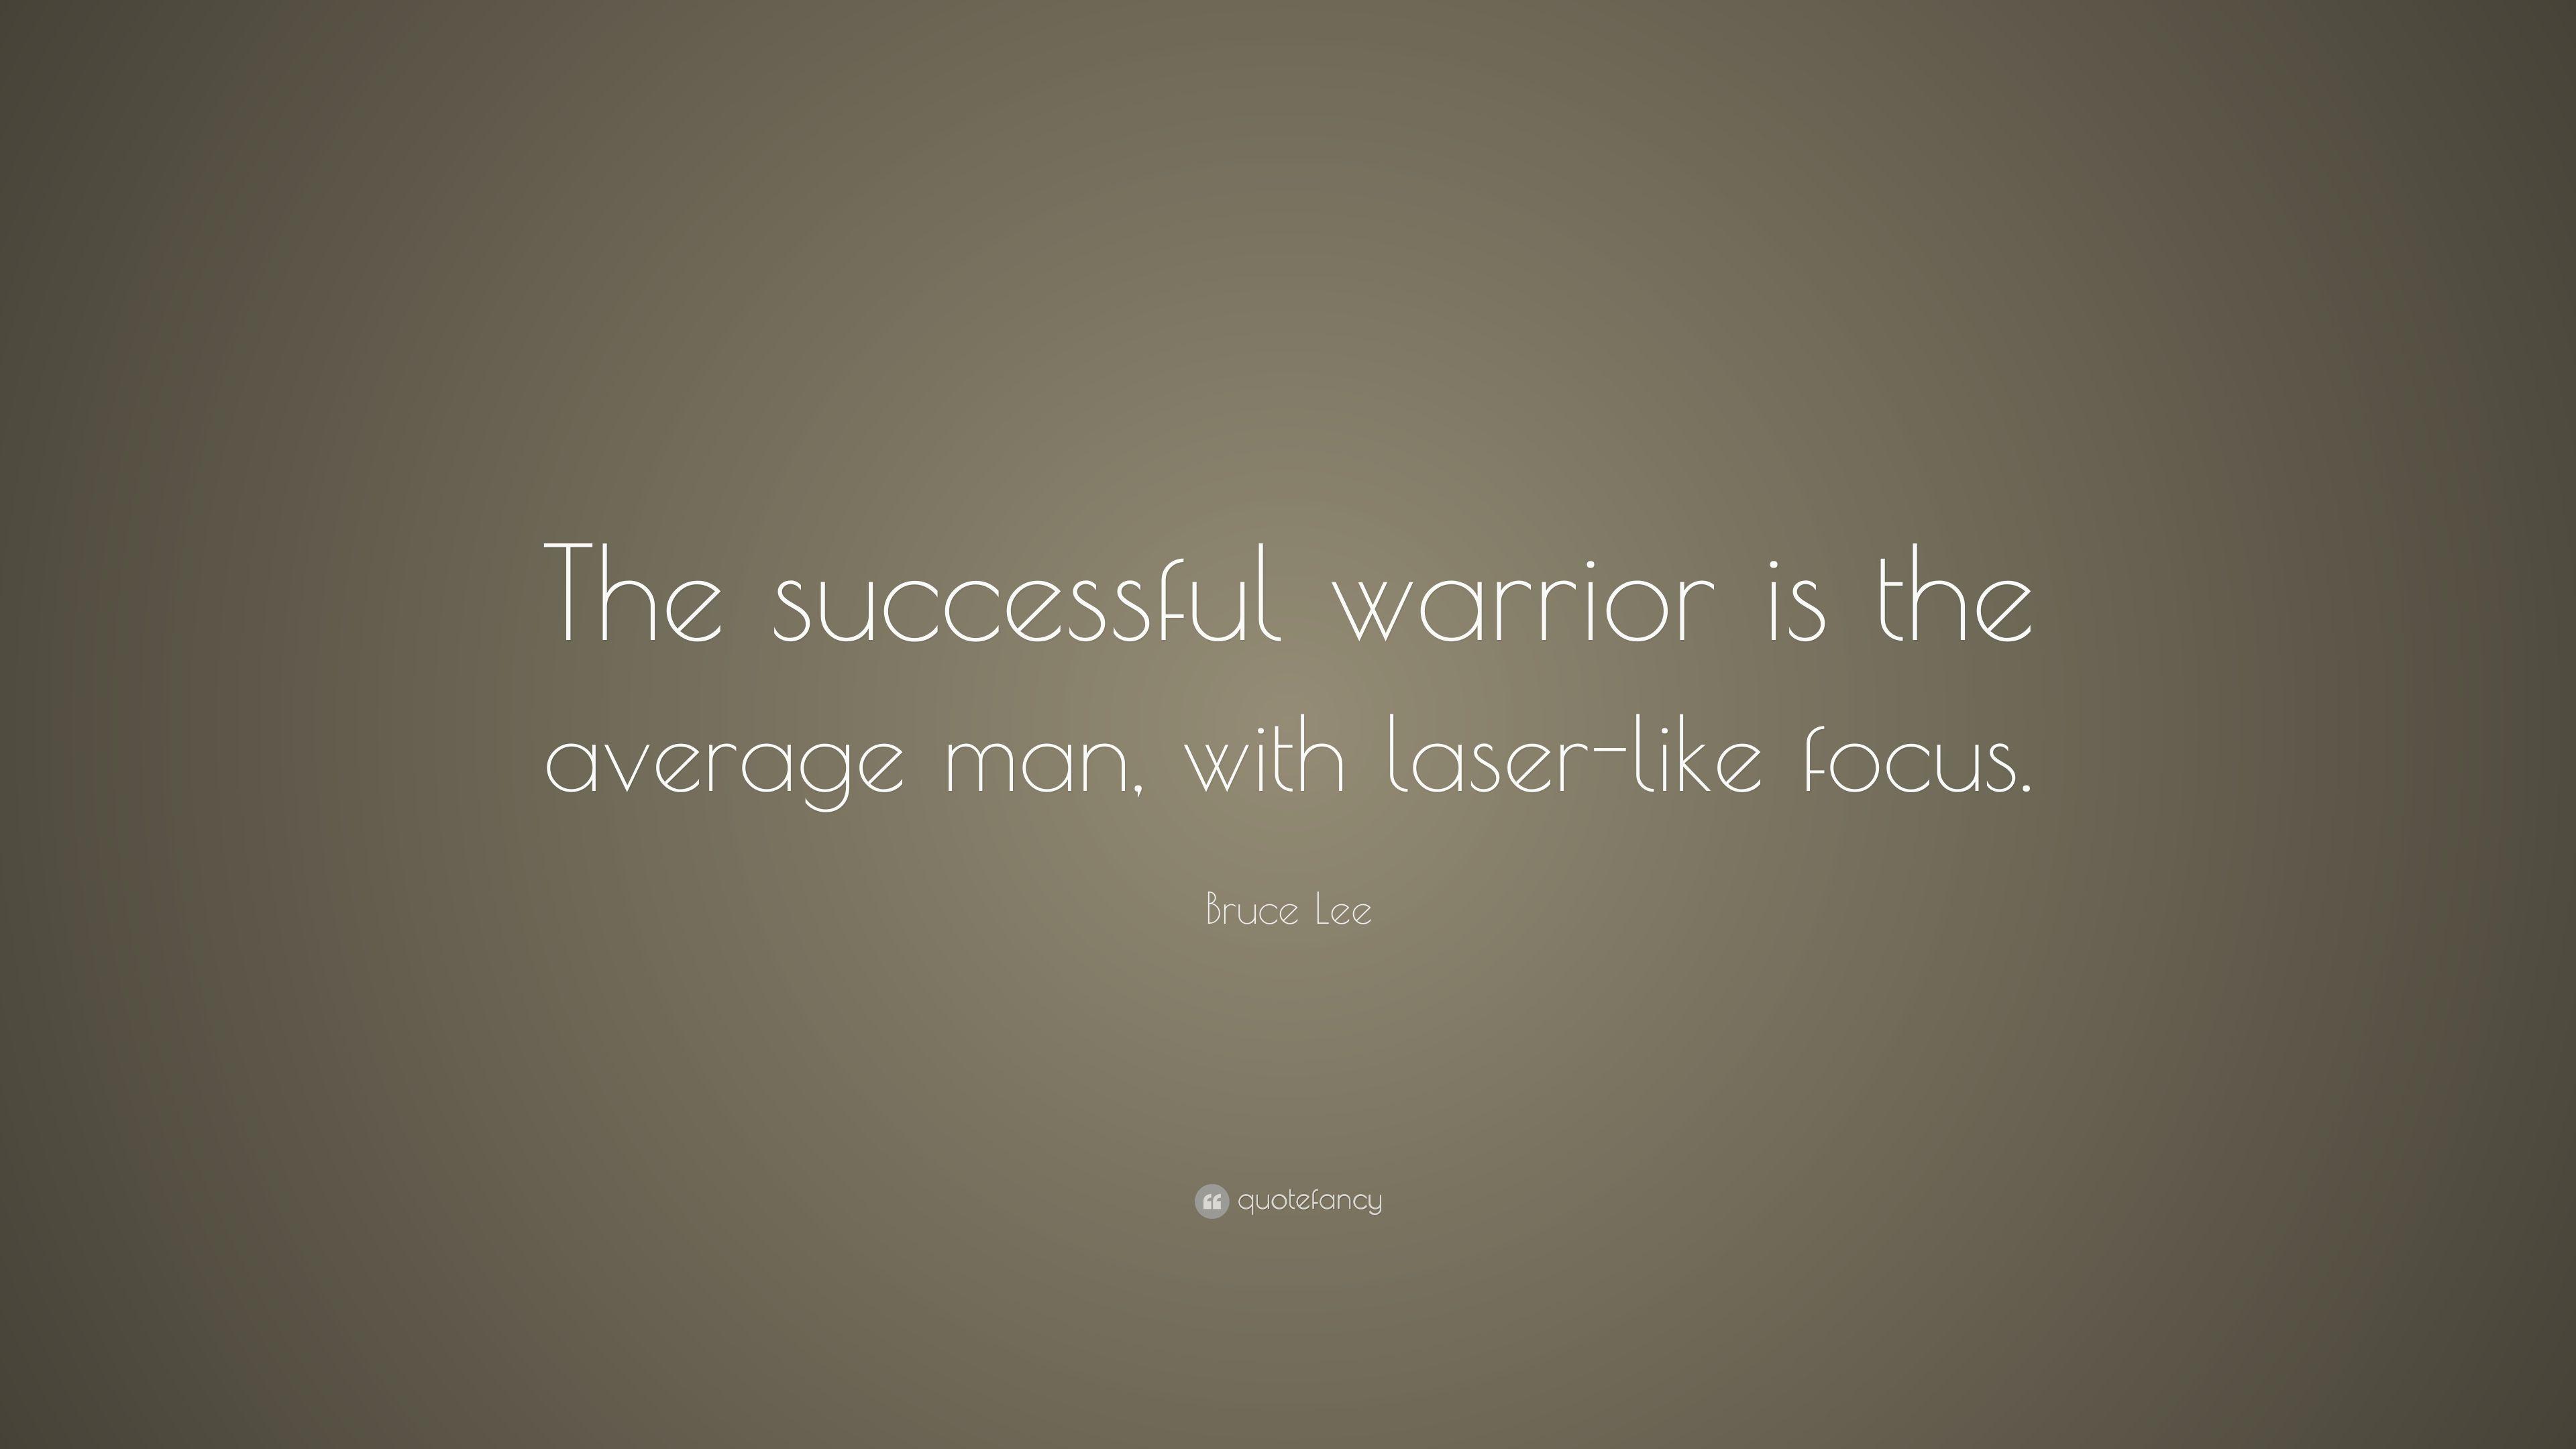 Bruce Lee Quote: “The successful warrior is the average man